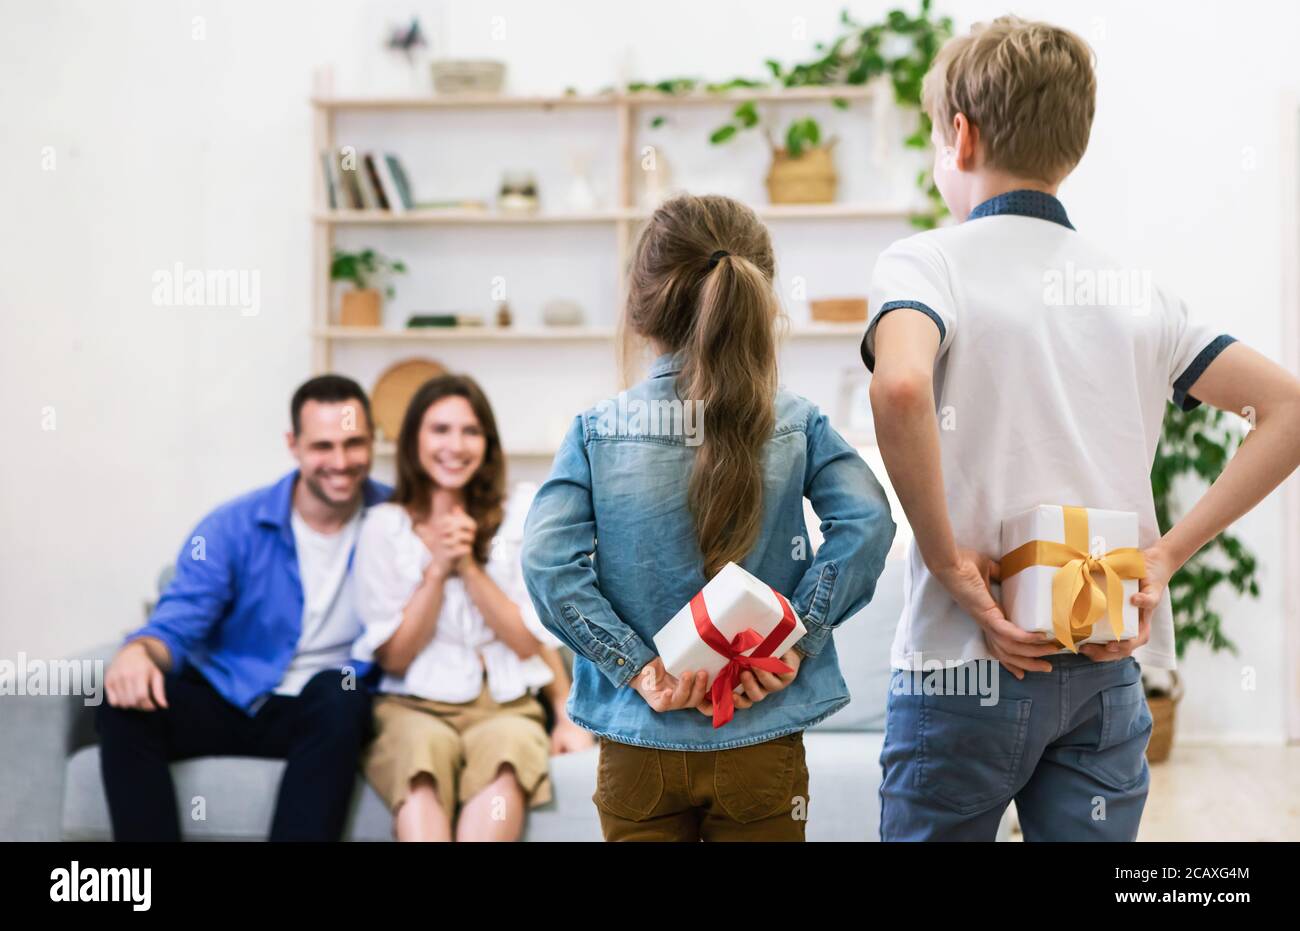 Children Giving Gifts To Their Happy Parents At Home Stock Photo